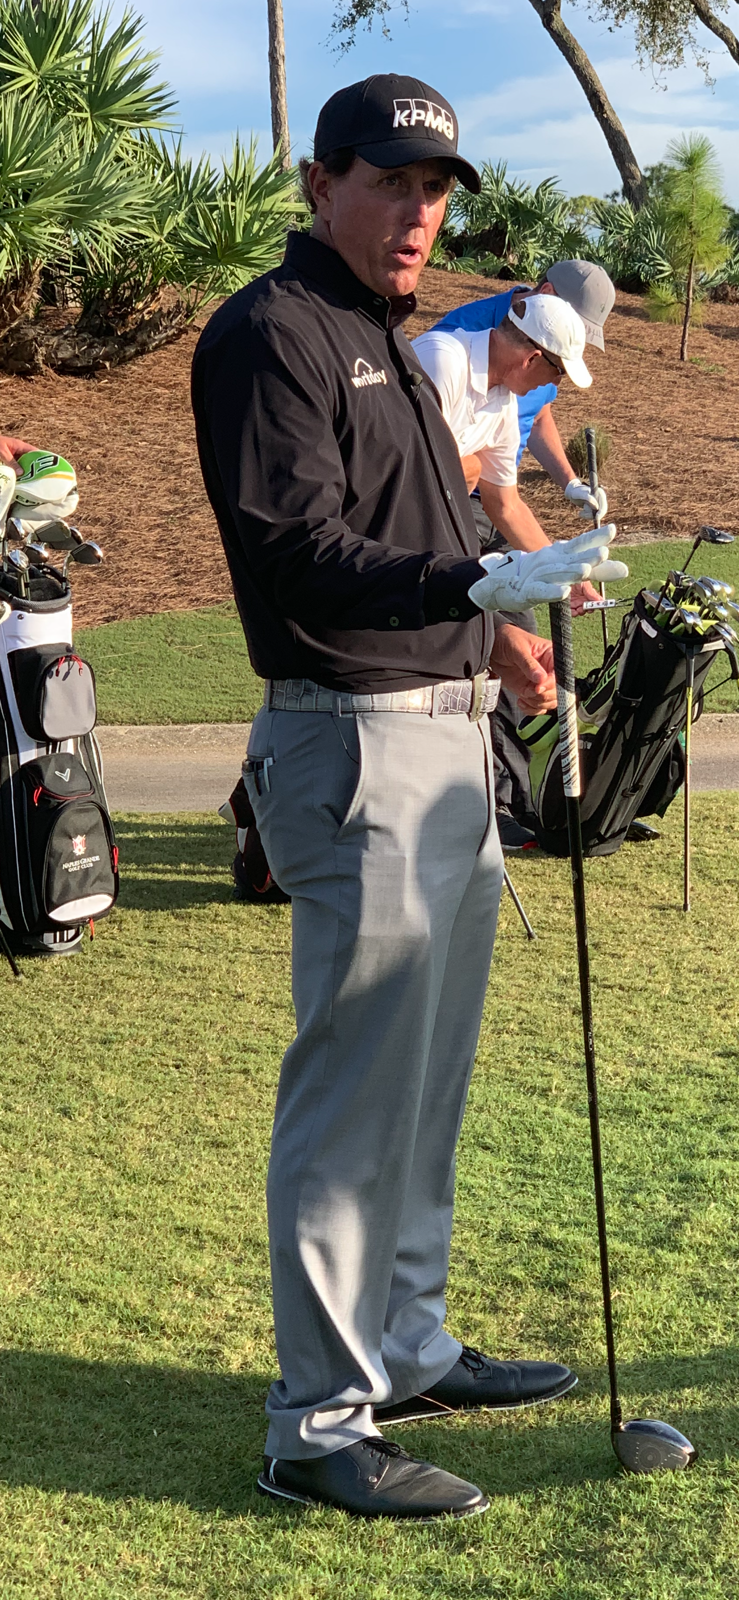 Golf great Phil Mickelson played Calusa Pines Golf Club in Naples on Monday, Nov. 18, 2019.